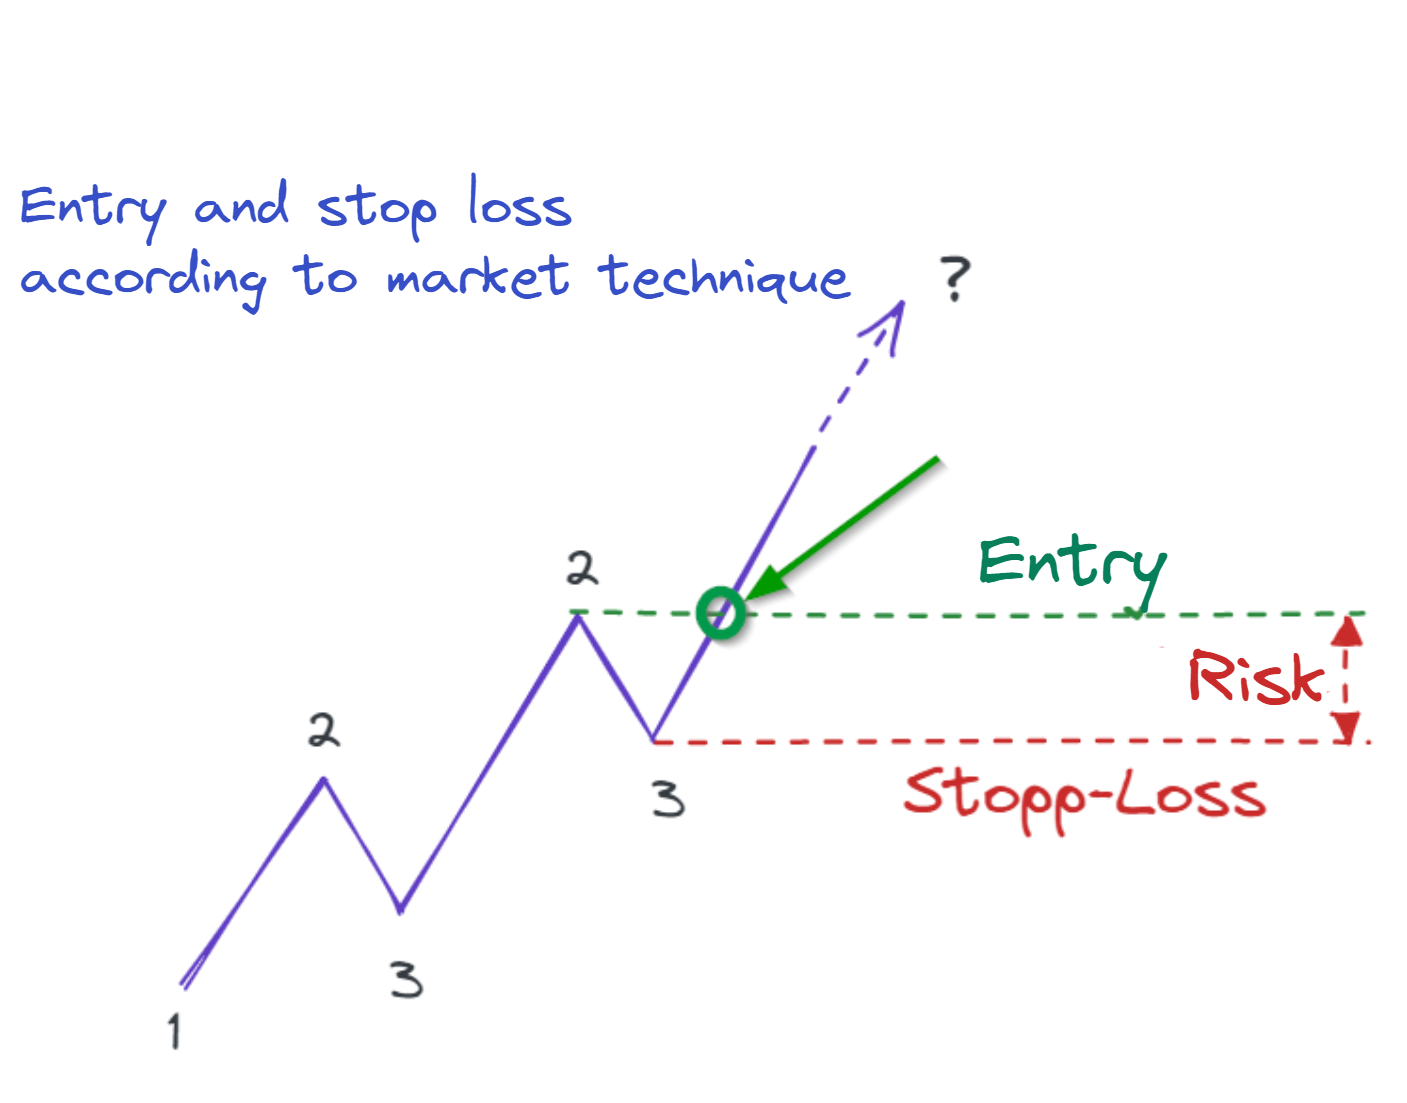 swing-trading-strategy-cot-strategy